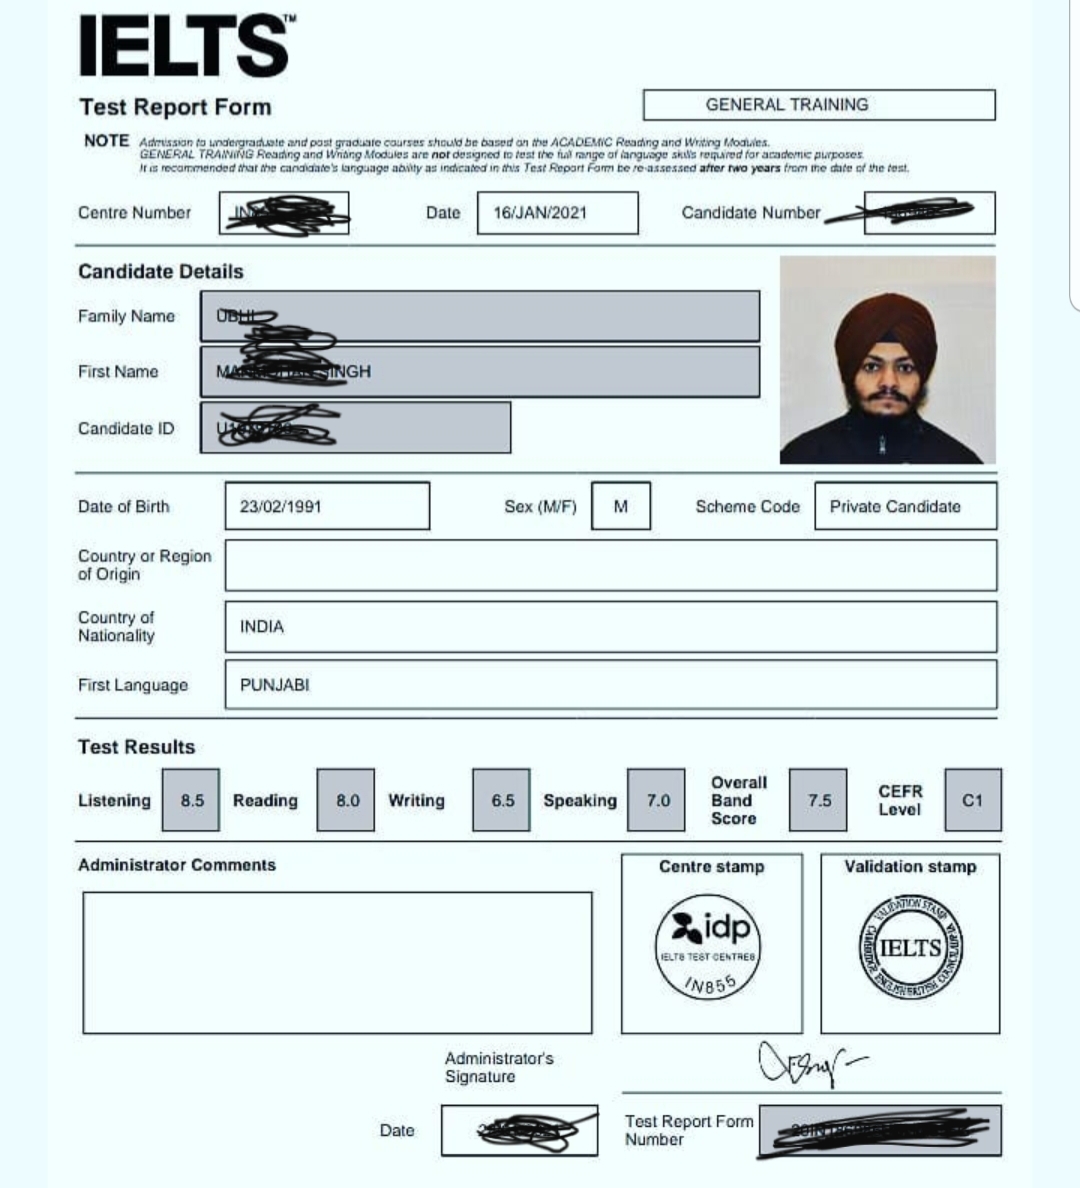 Are you looking for IELTS certificate for sale wit